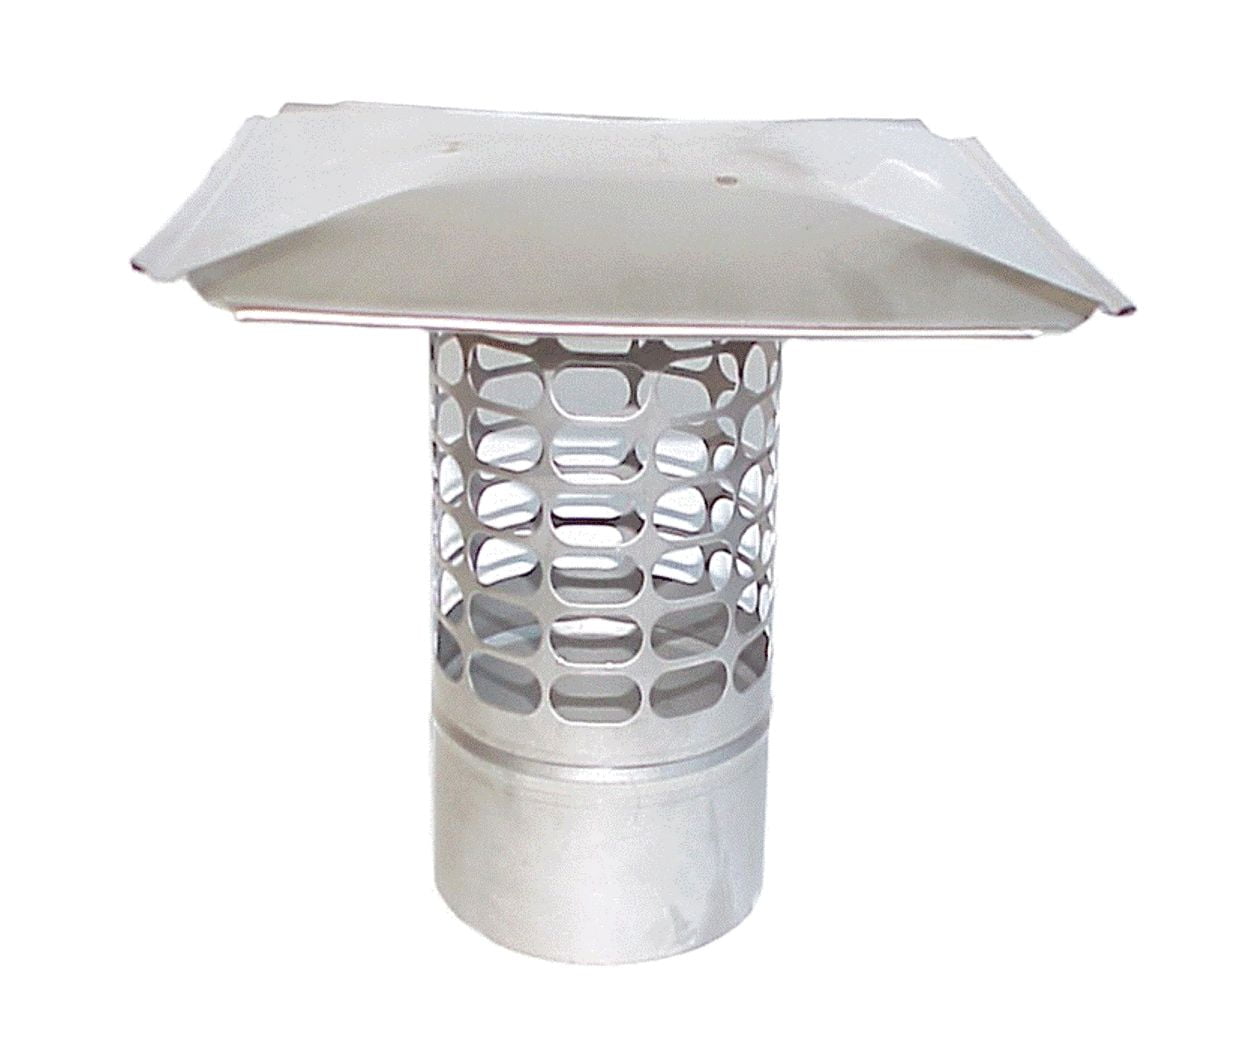 1-Pack The Forever Cap CCSC1925 19 x 25-Inch Multi Flue Stainless Steel Crown Mount Chimney Cap